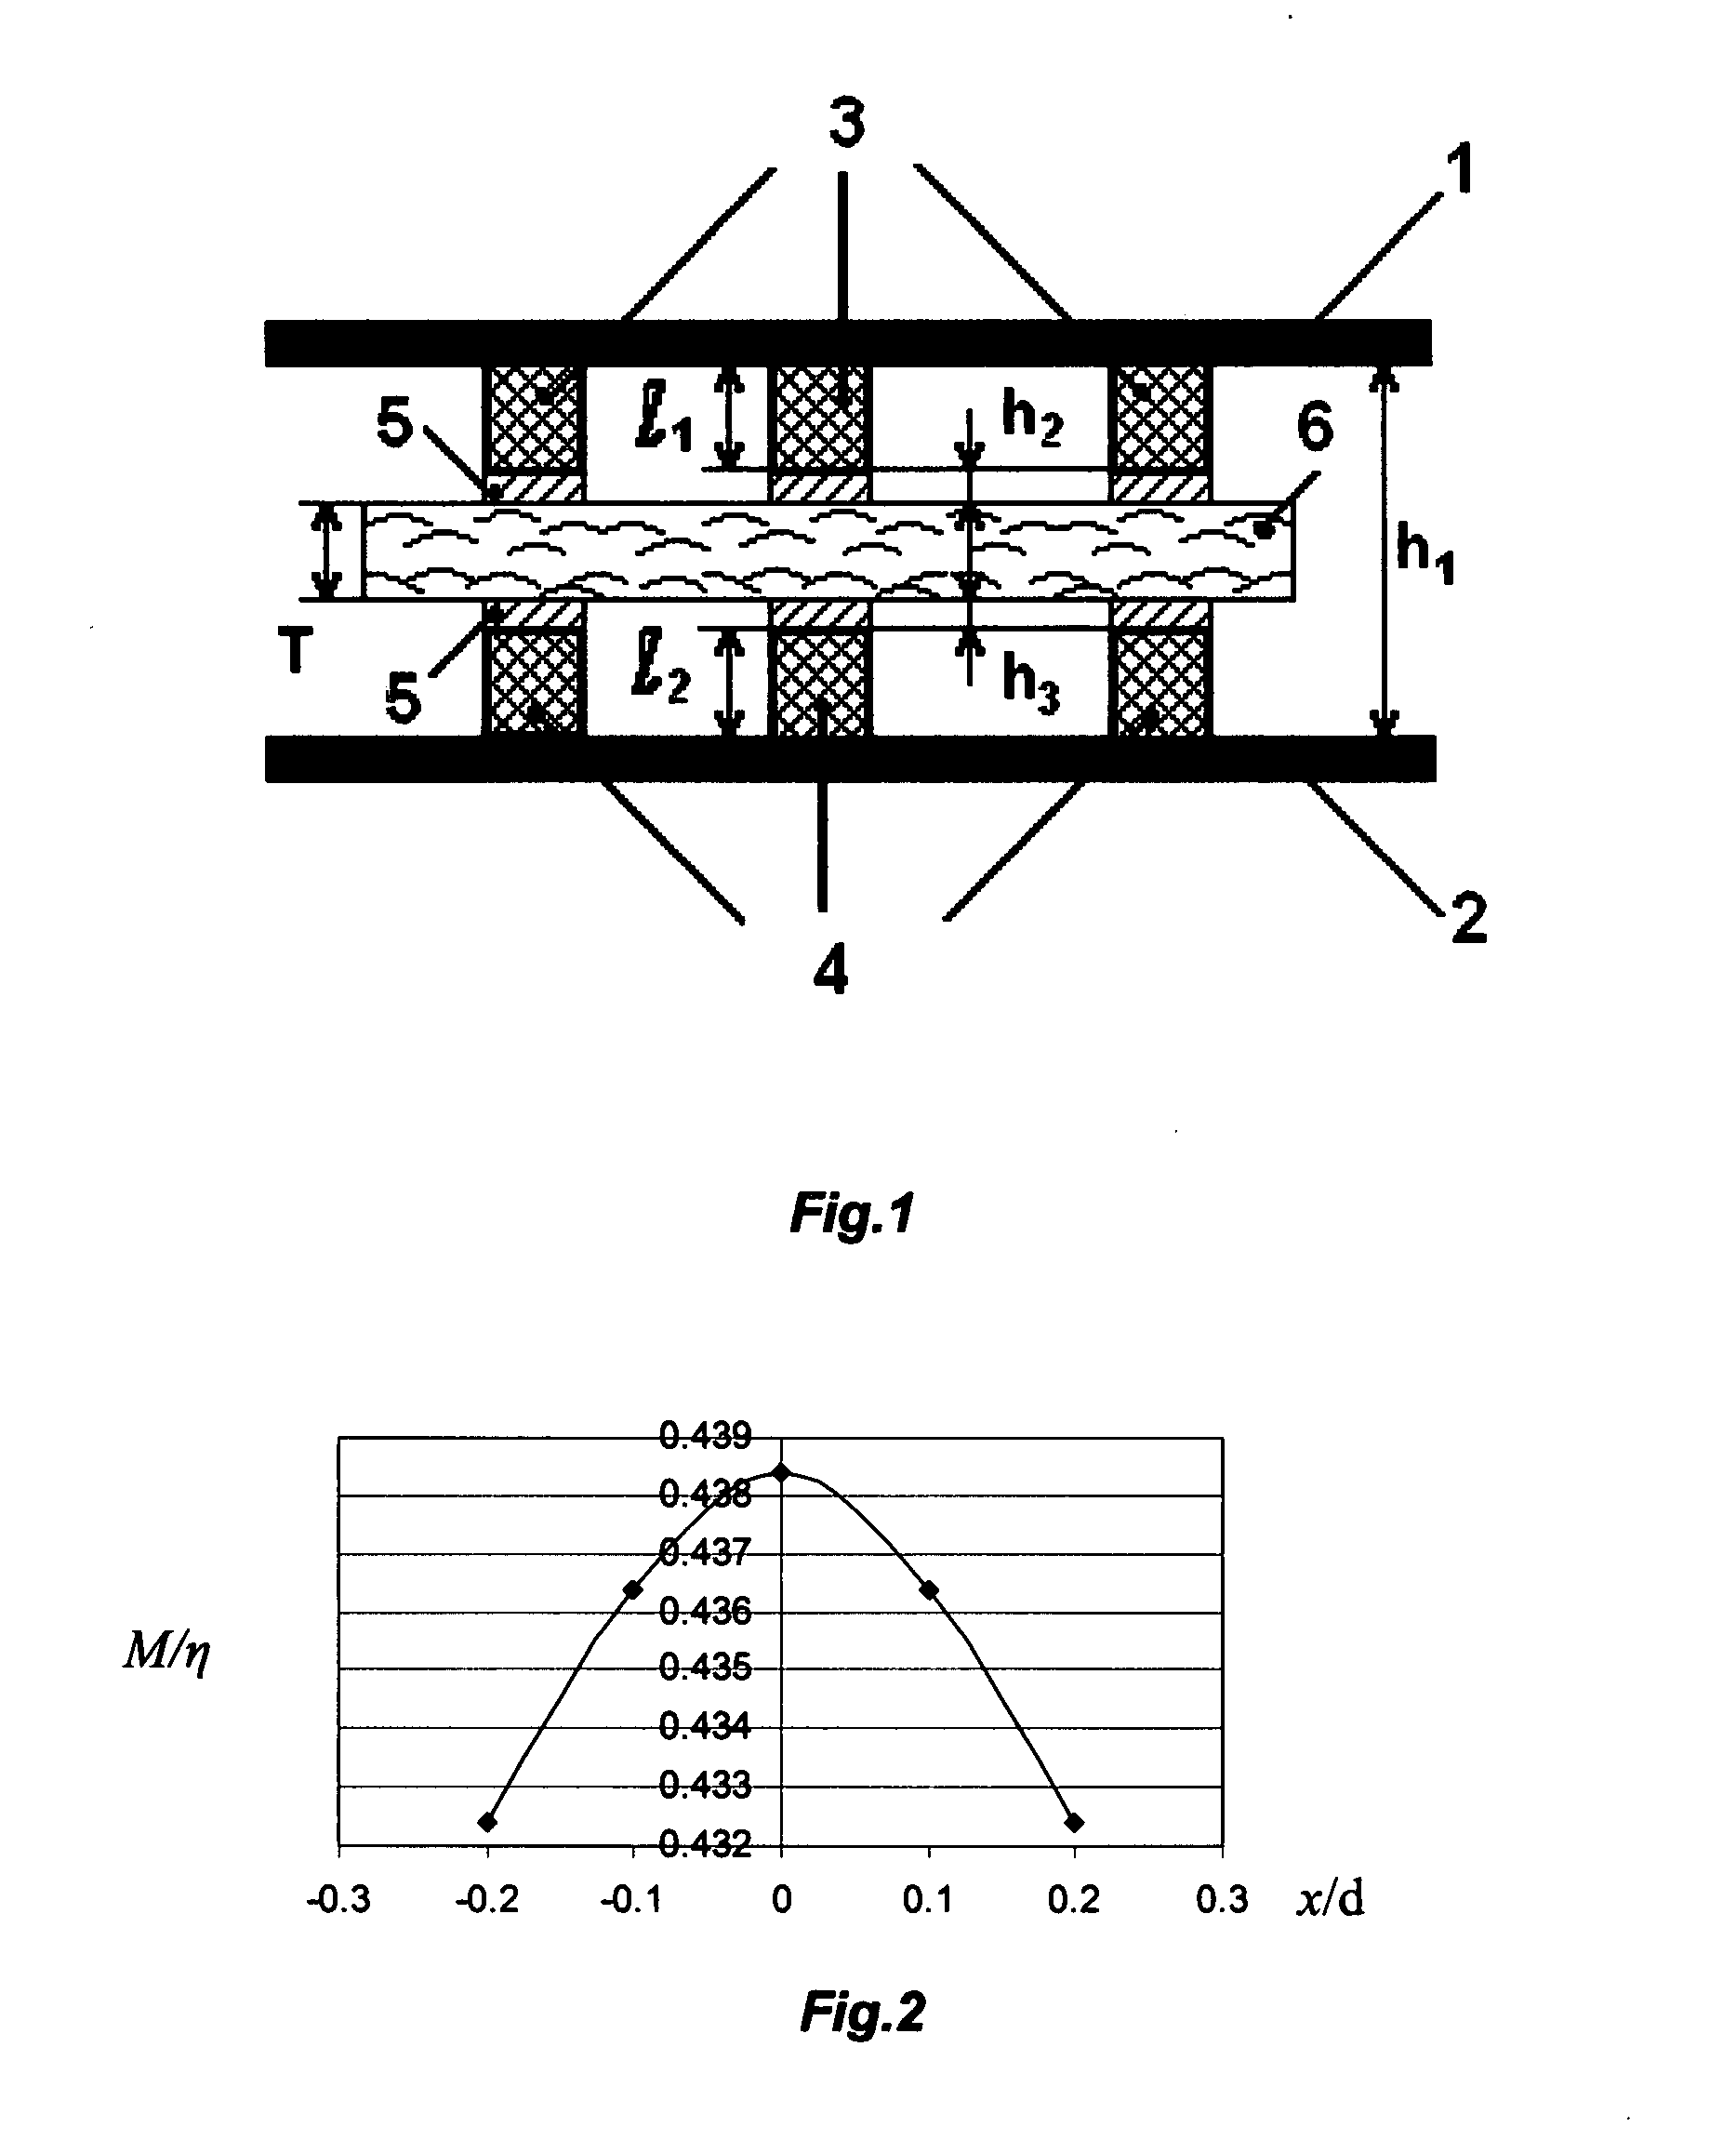 Apparatus and method for determining service life of electrochemical energy sources using combined ultrasonic and electromagnetic testing